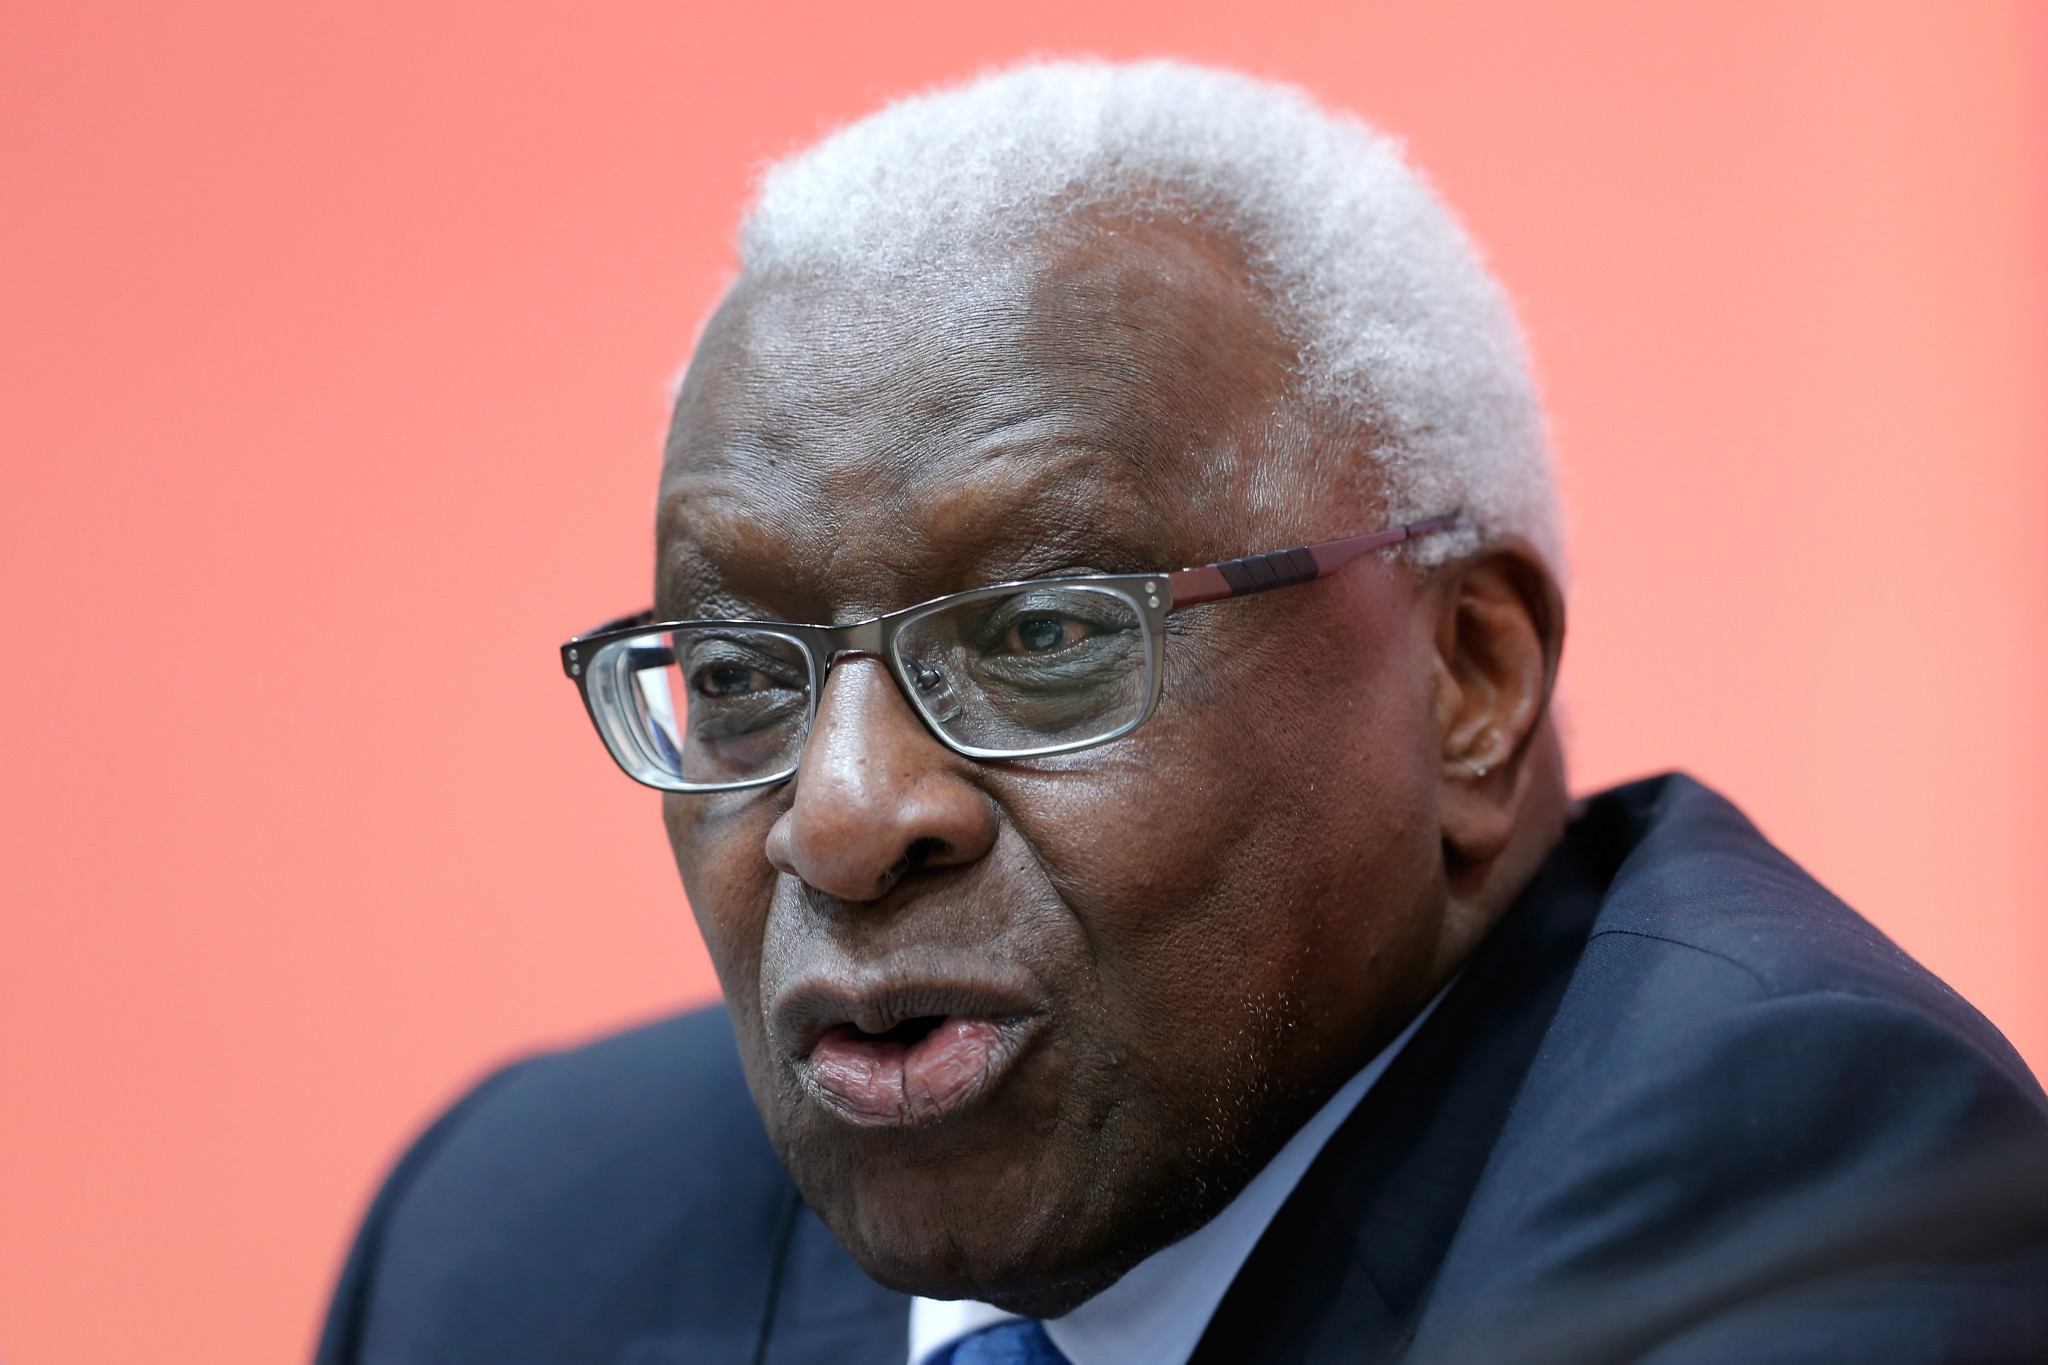 Papa Diack has reportedly blamed the accusations of bribery and corruption on a smear campaign against his father, former IAAF President Lamine Diack, who is currently being held by authorities in France ©Getty Images